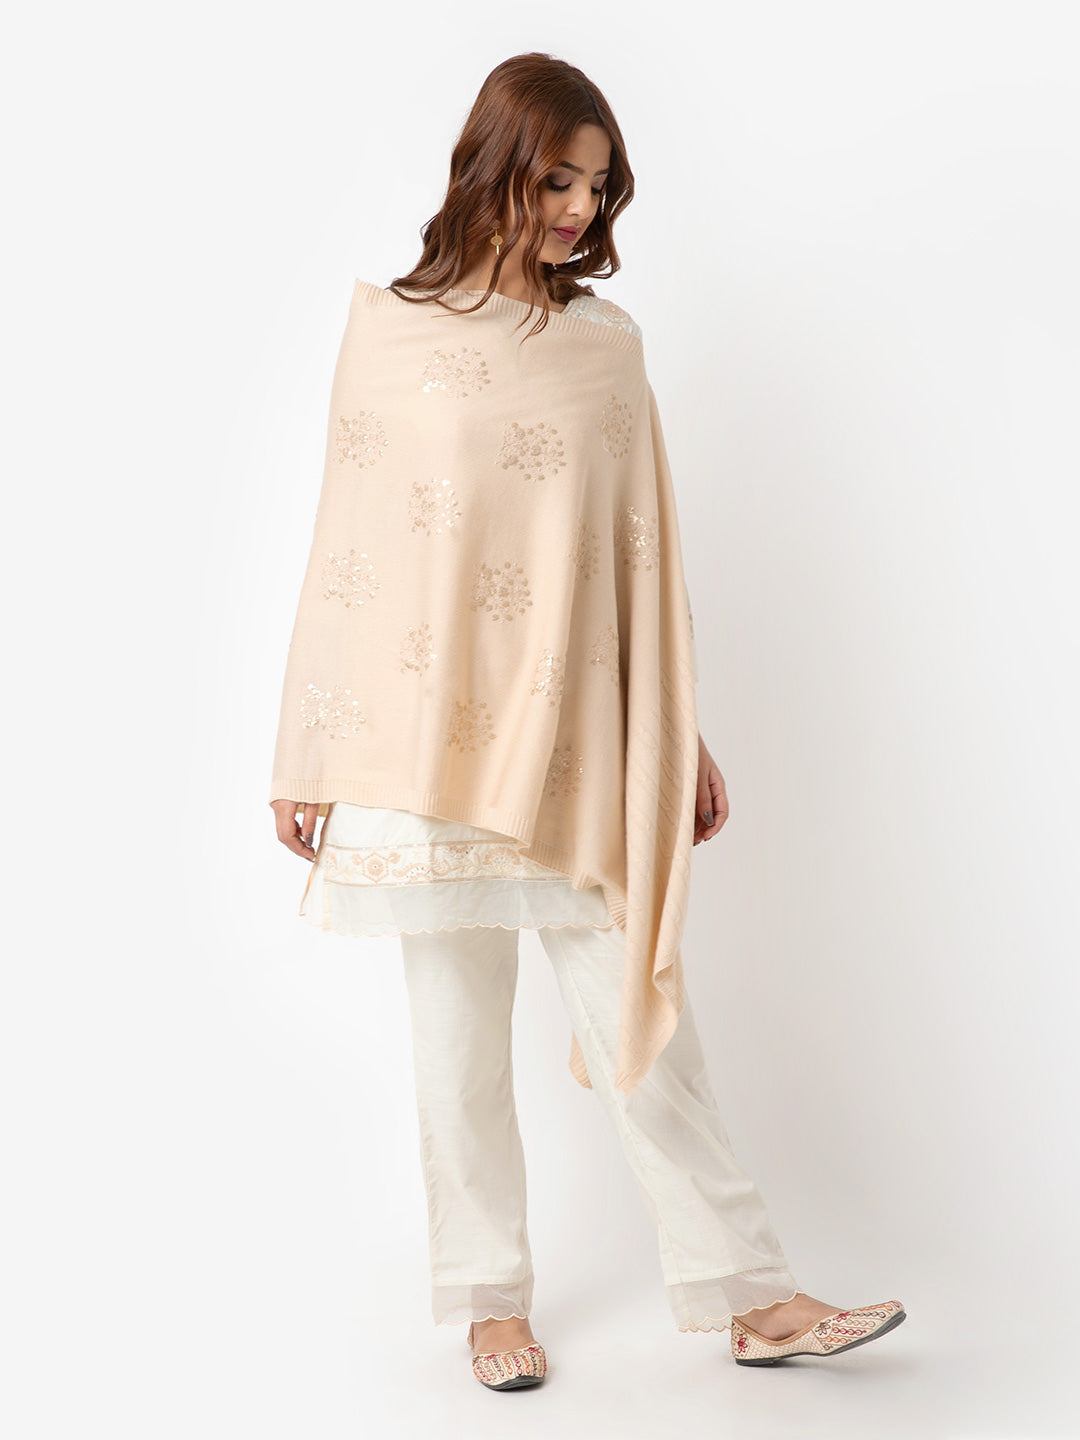 Camel Woolen Shawl with Thread Work Embroidery